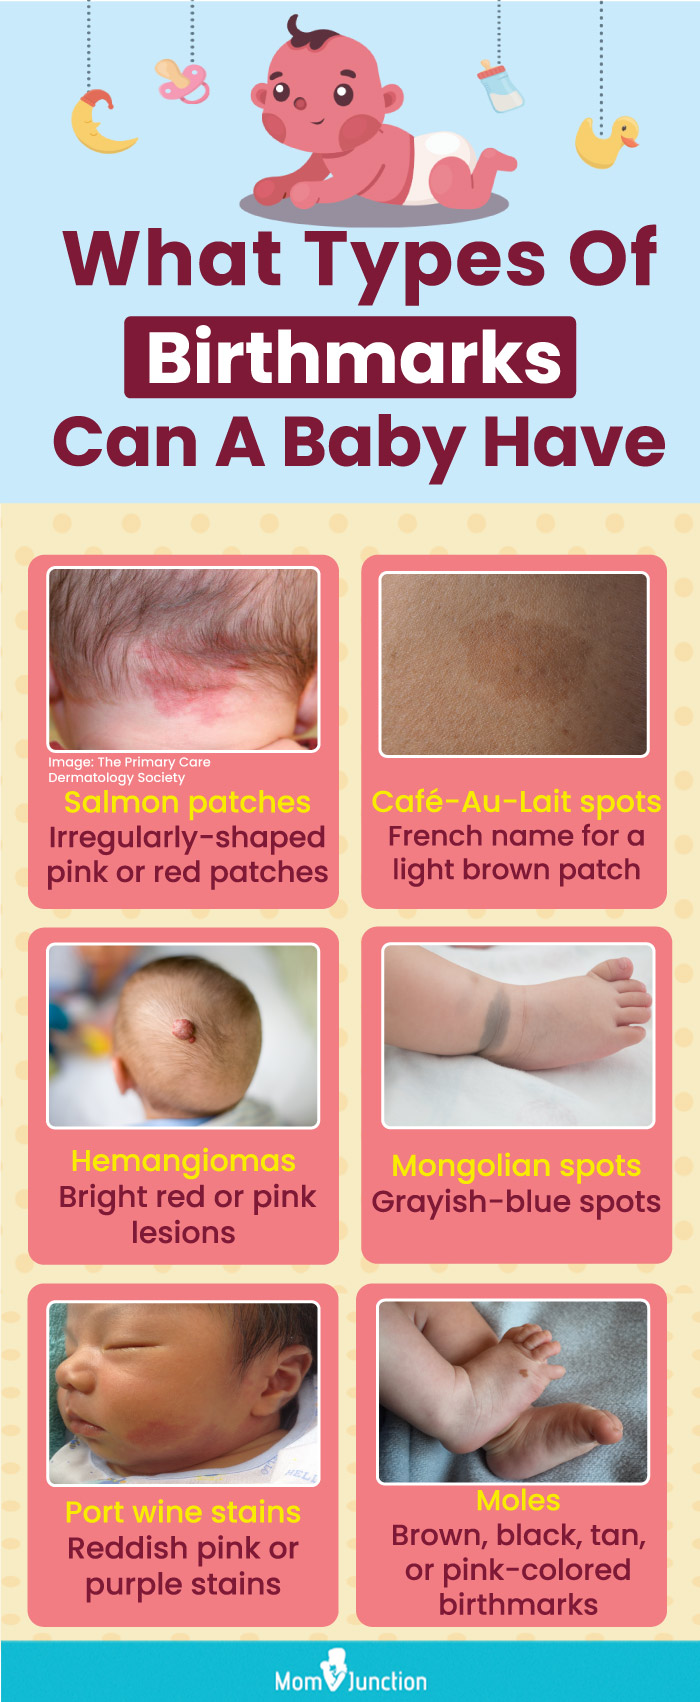 what types of birthmarks can a baby have (infographic)